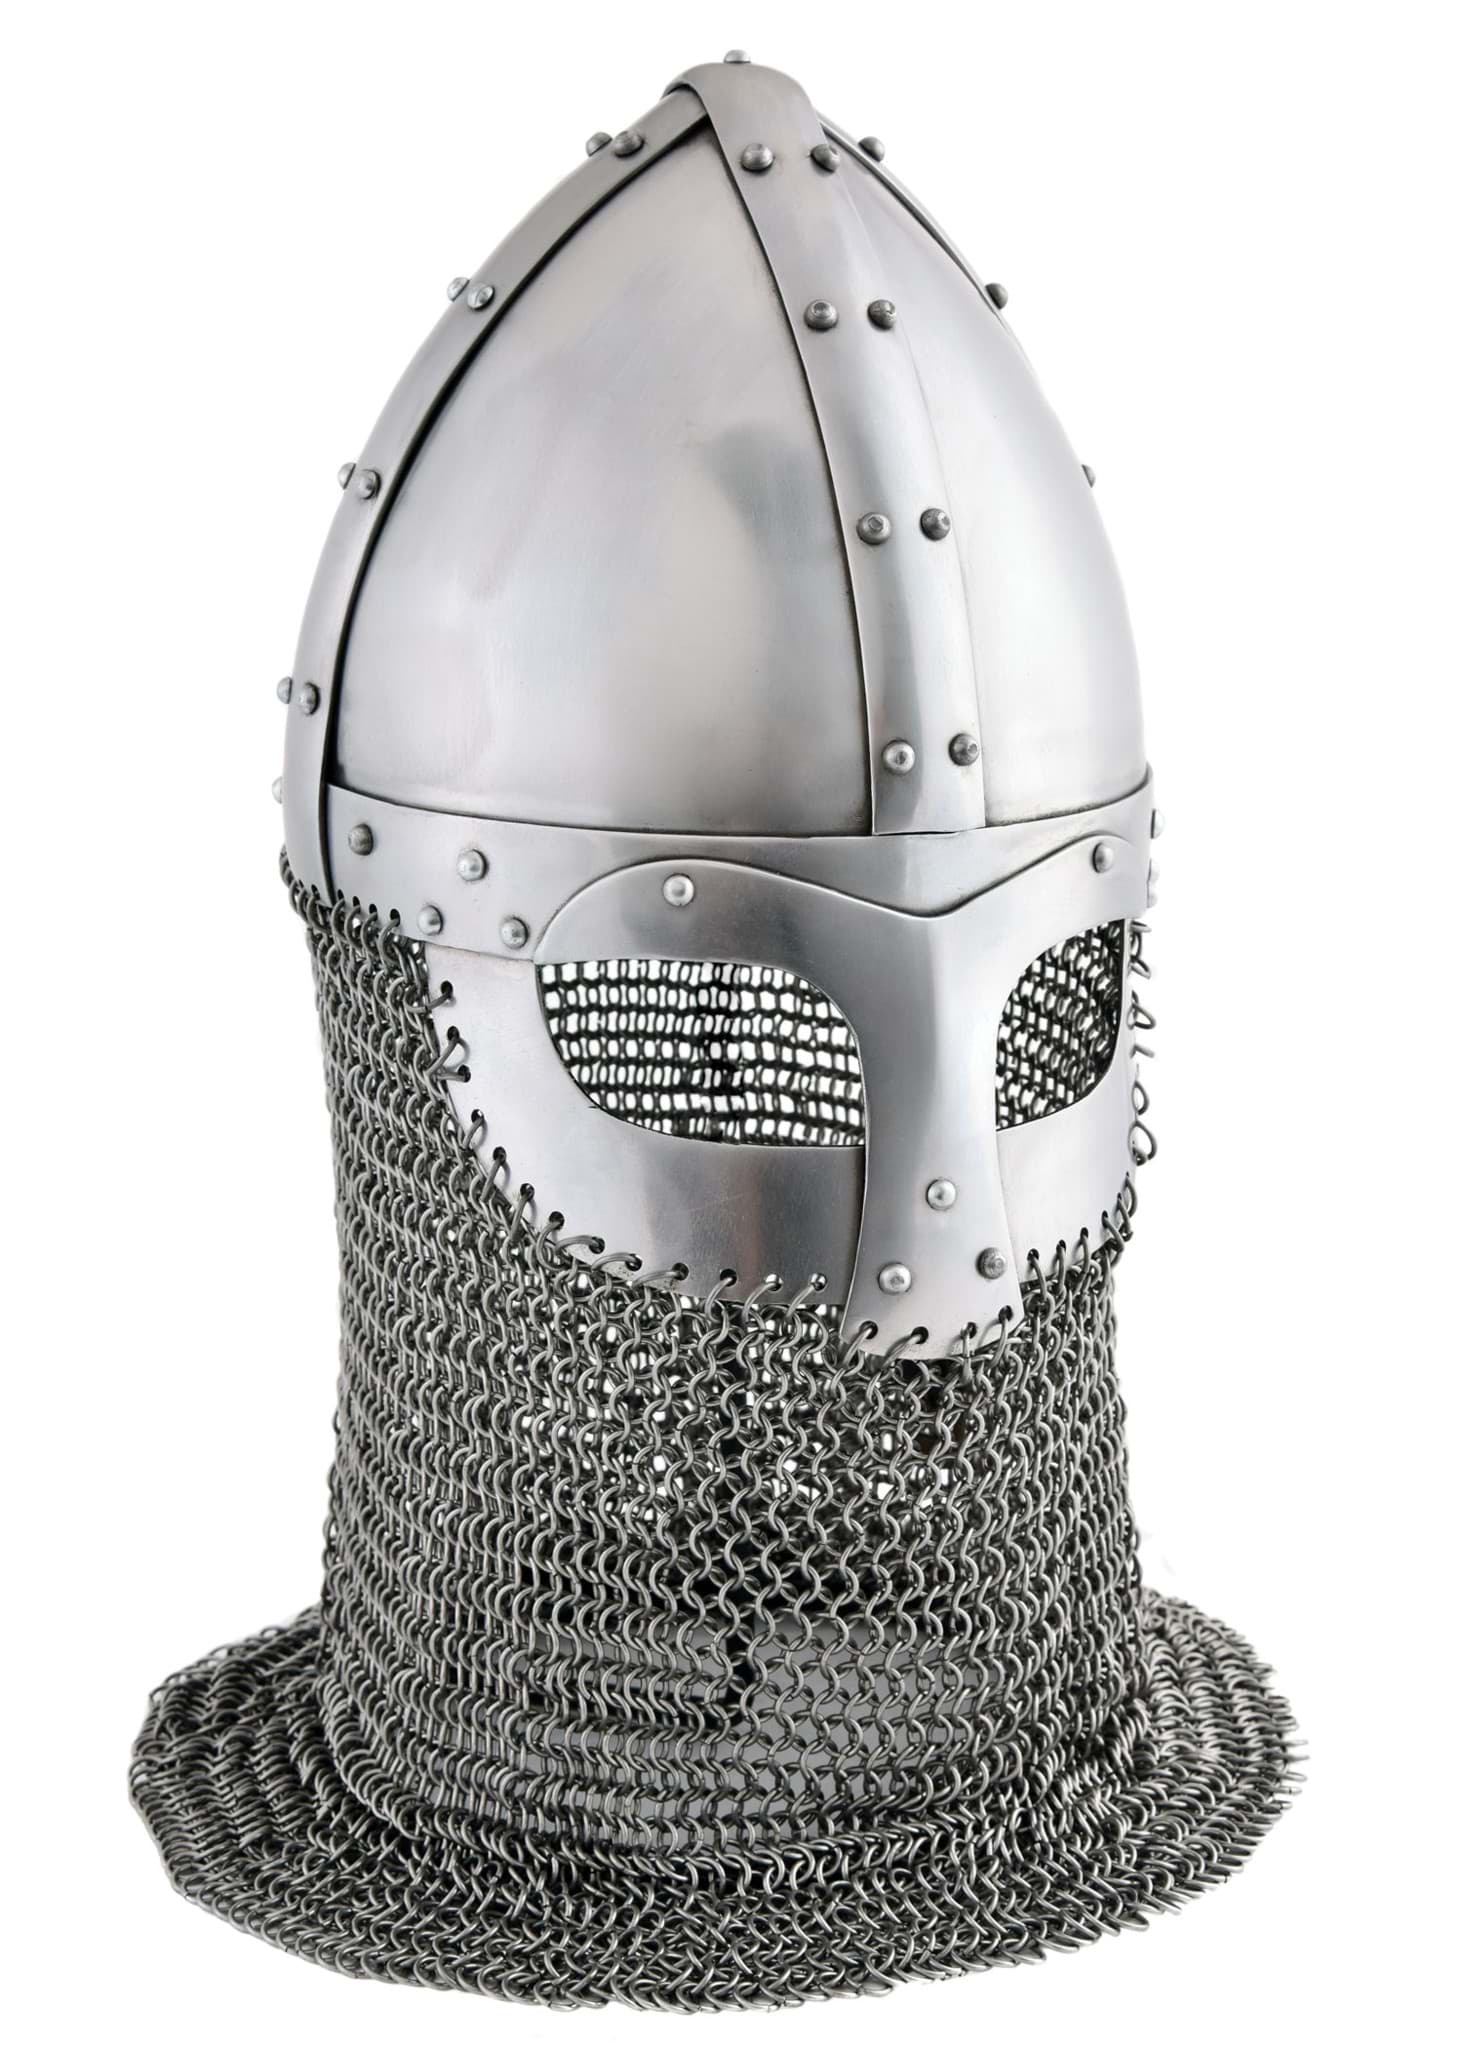 Picture of Ulfberth - Vendel Era Spangenhelm with Chain Mail Aventail M